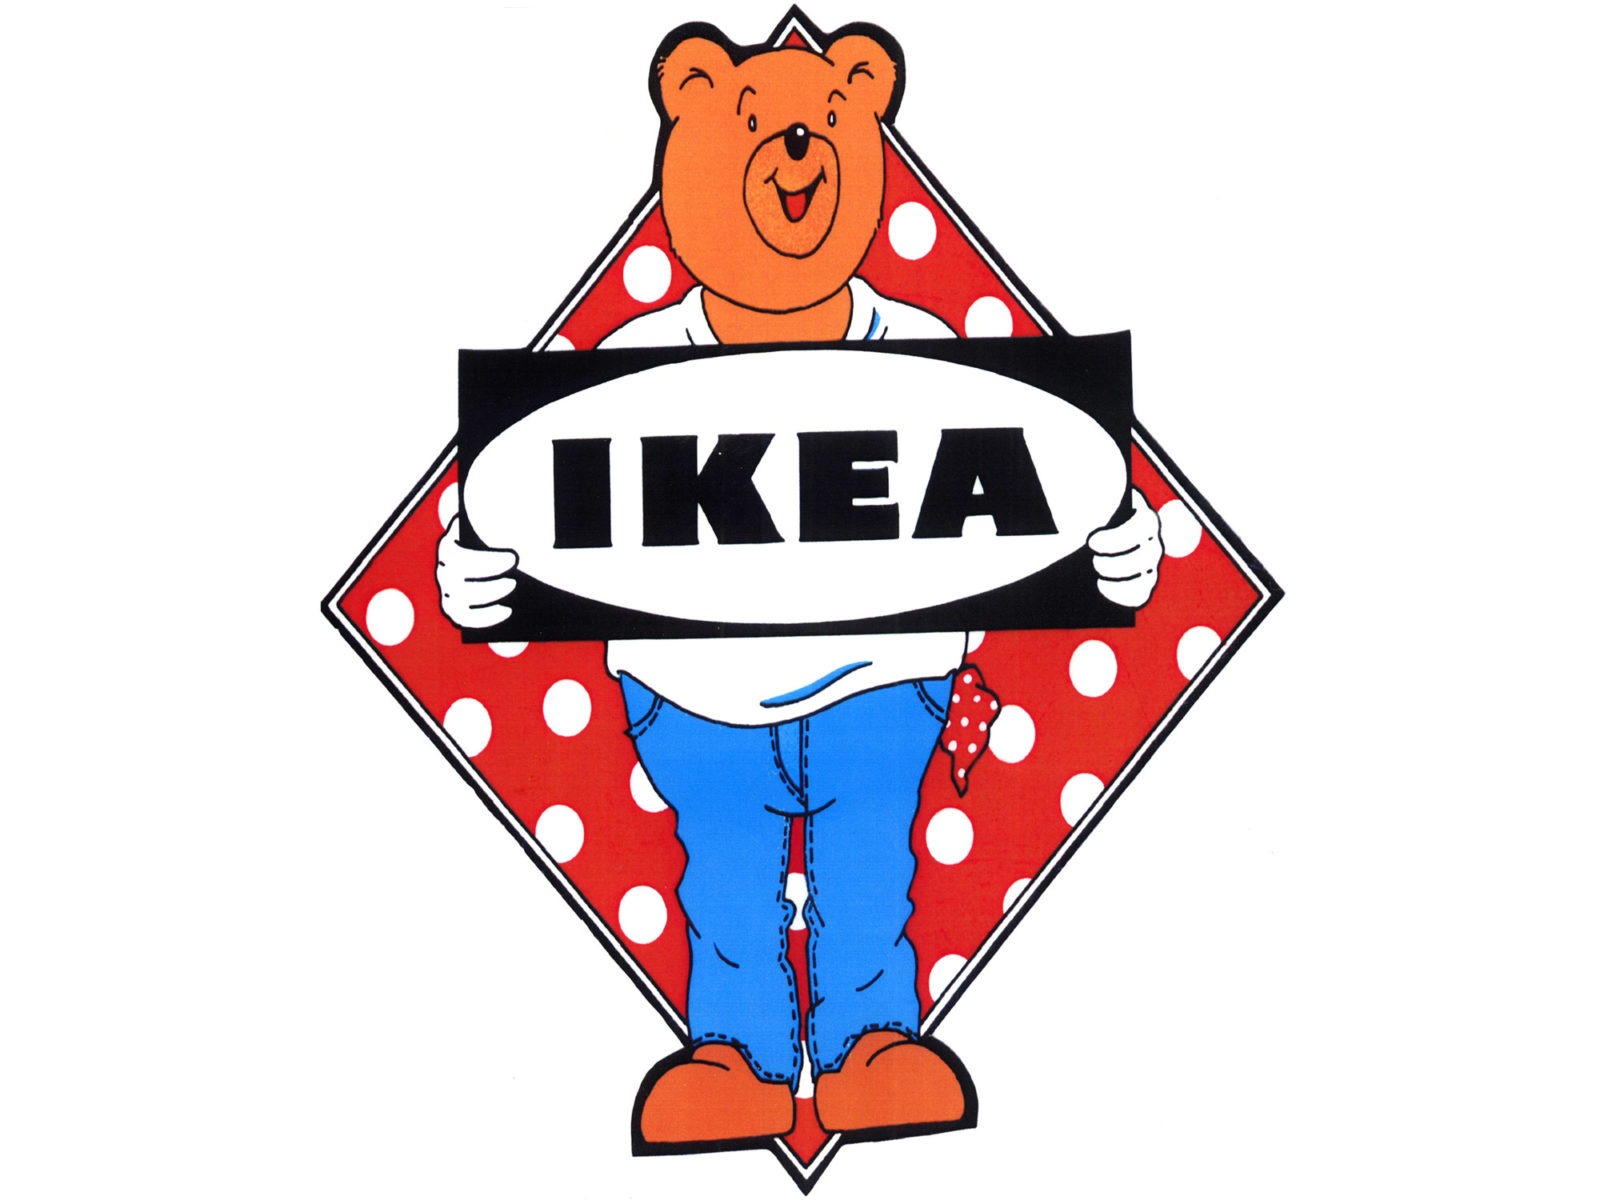 Drawing of a happy teddy bear holding up a sign with the text IKEA.